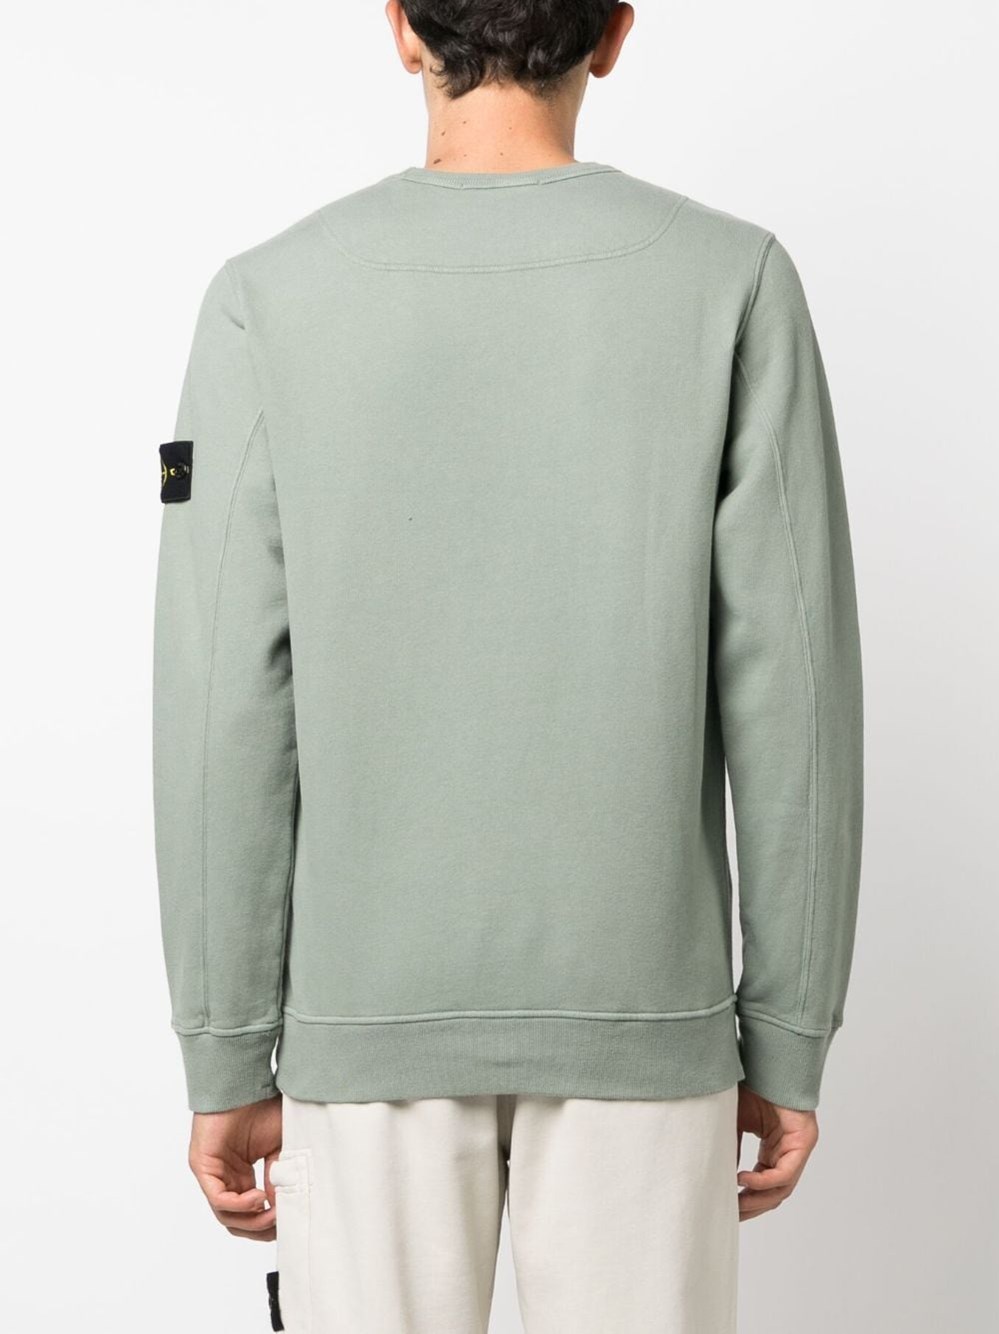 stone island 791562420 V0055 SAGE available on montiboutique.com - 56263